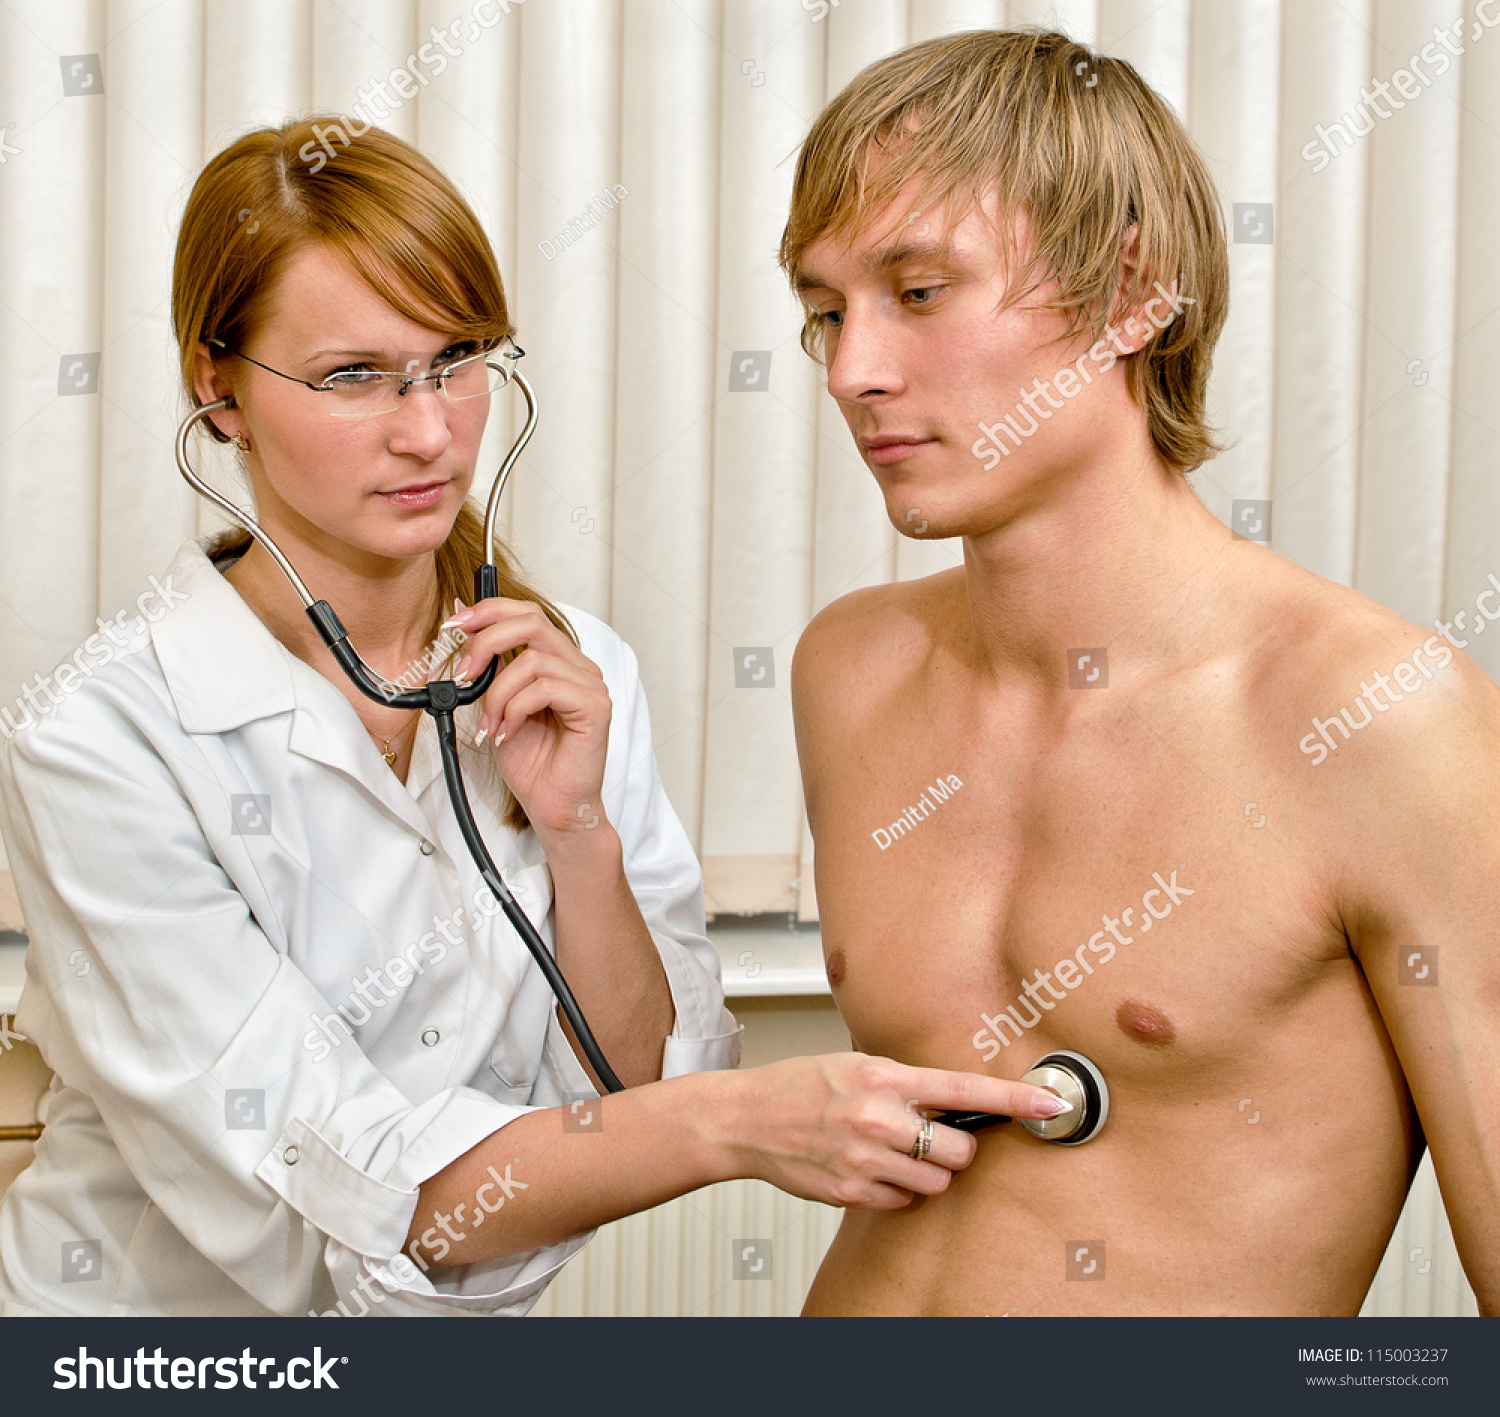 female doctor checking male